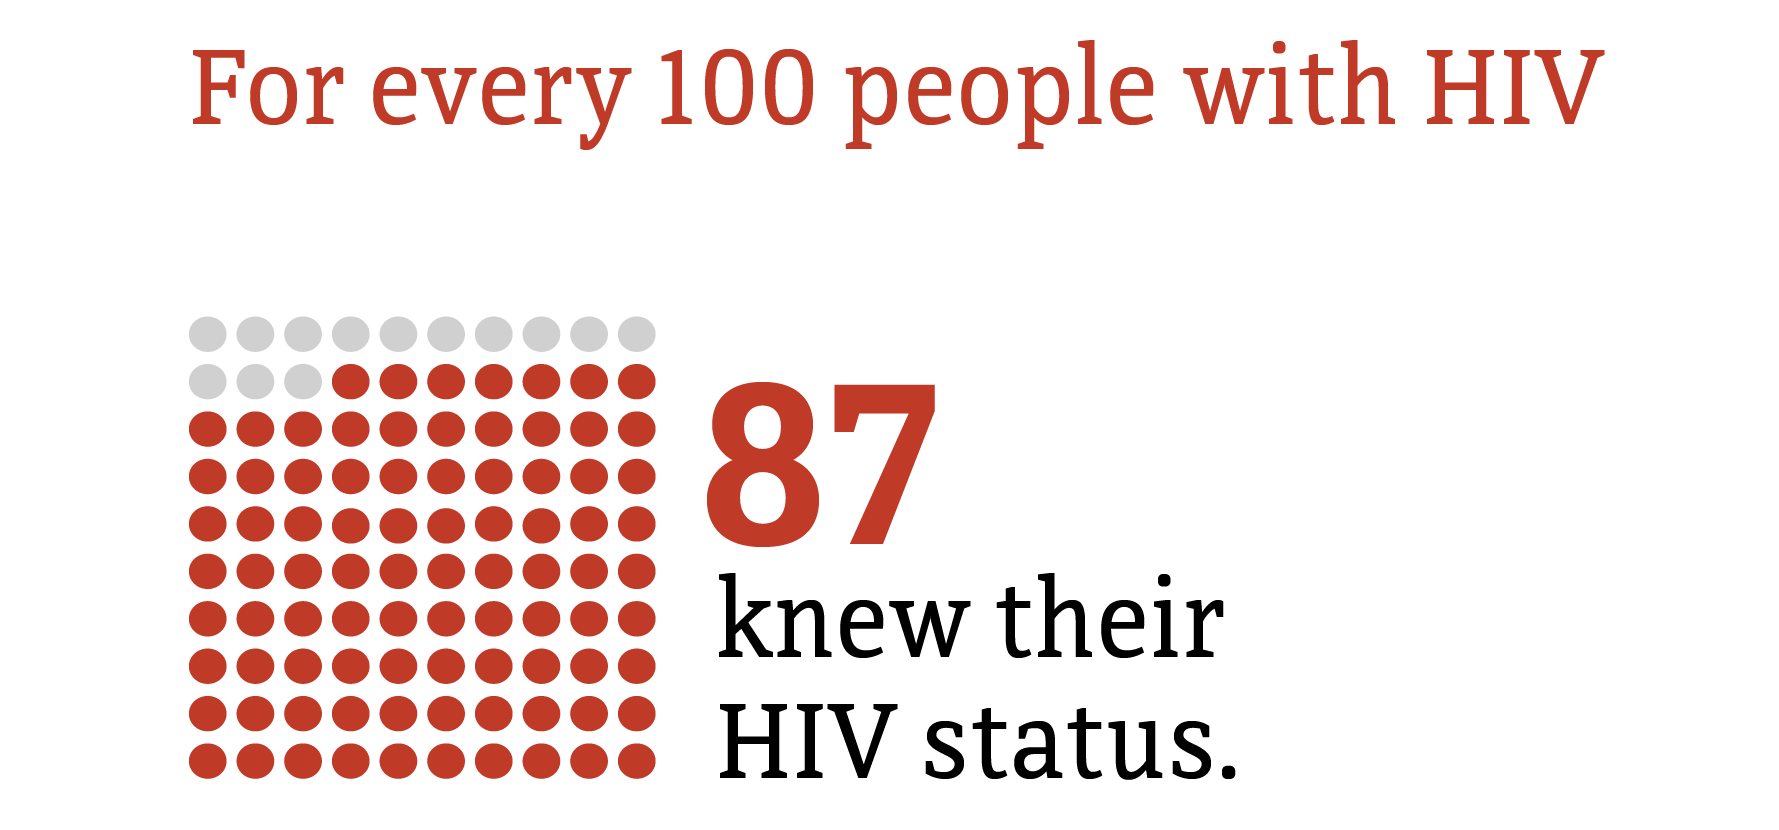 This chart shows in 2019, for every 100 people with HIV, 87 knew their HIV status.